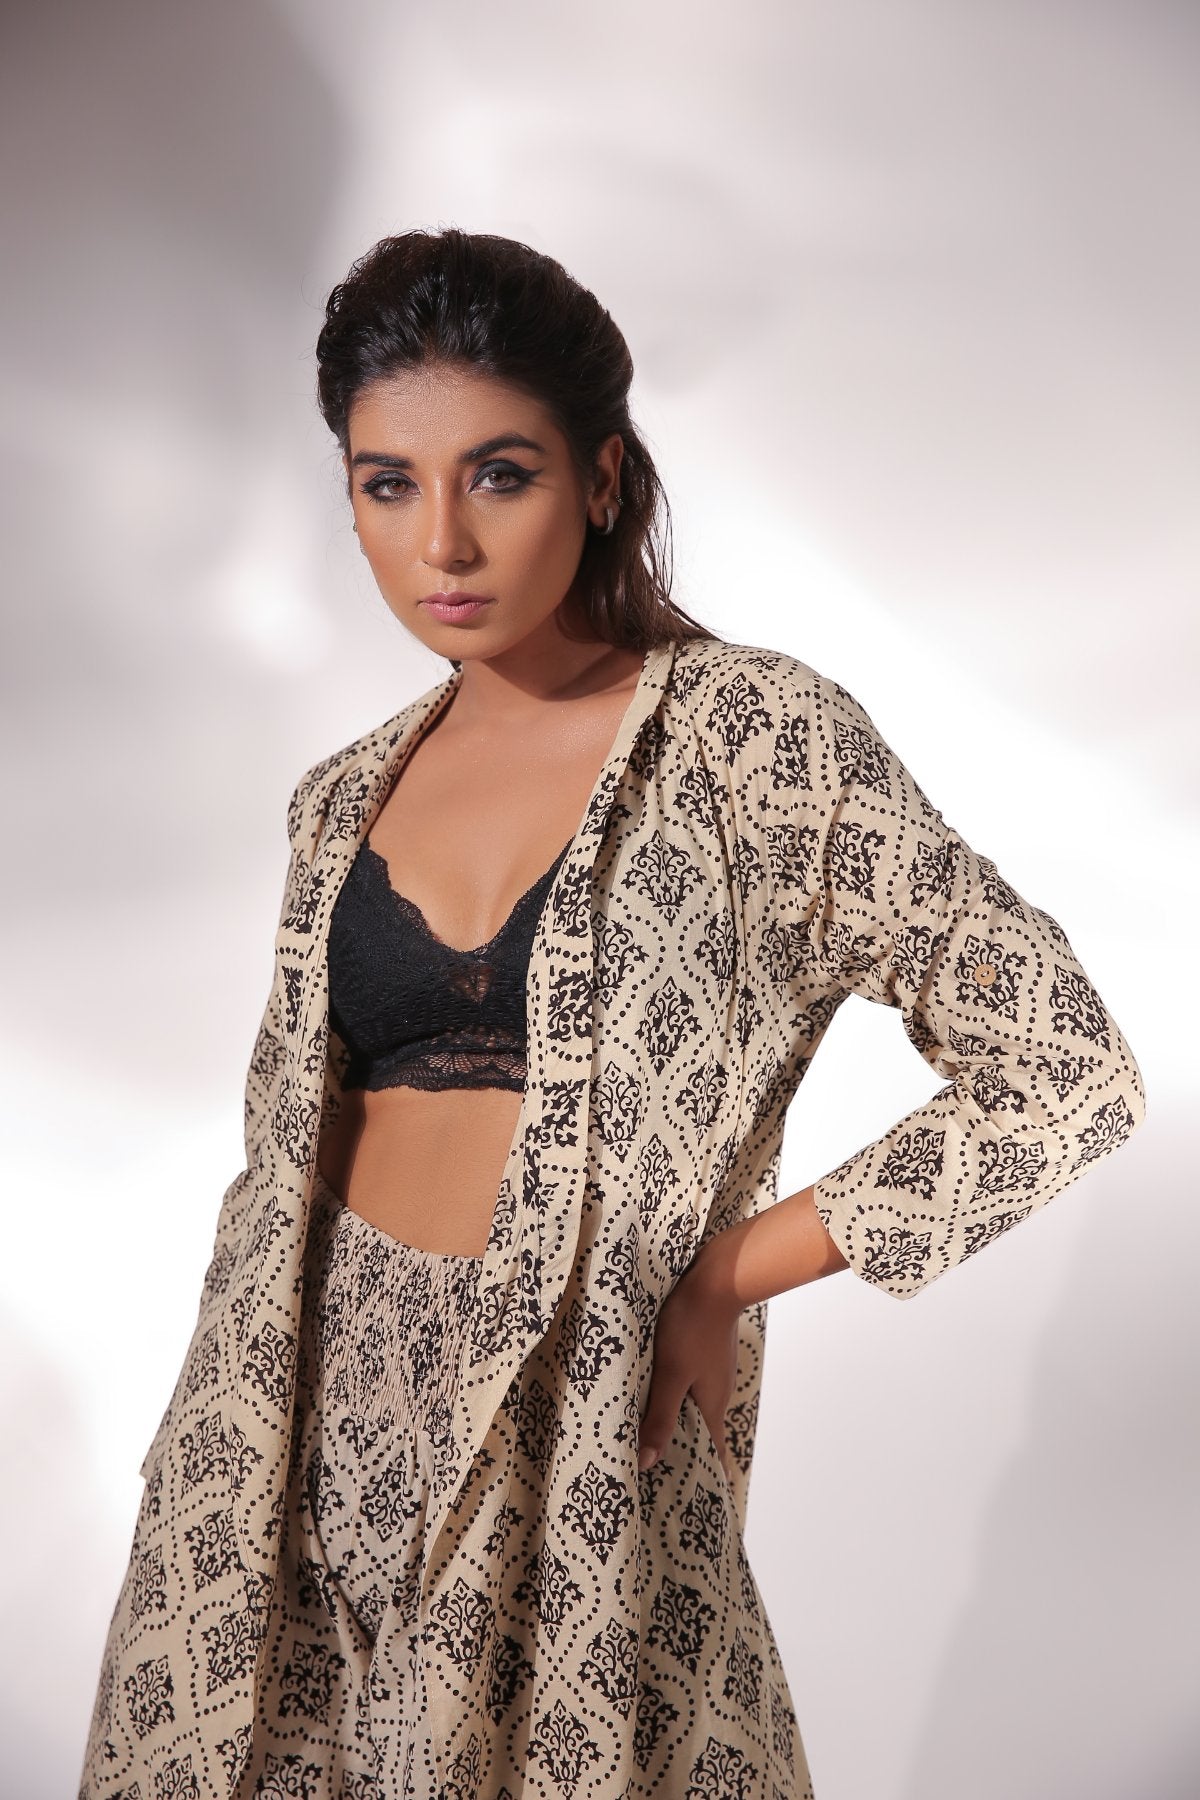 Beige Block Printed Cape With Pants at Kamakhyaa by Keva. This item is Beige, Black, Block Prints, Cape, Co-ord Sets, Cotton, Natural, Office, Office Wear Co-ords, Printed Selfsame, Relaxed Fit, Resort Wear, Womenswear, Zima